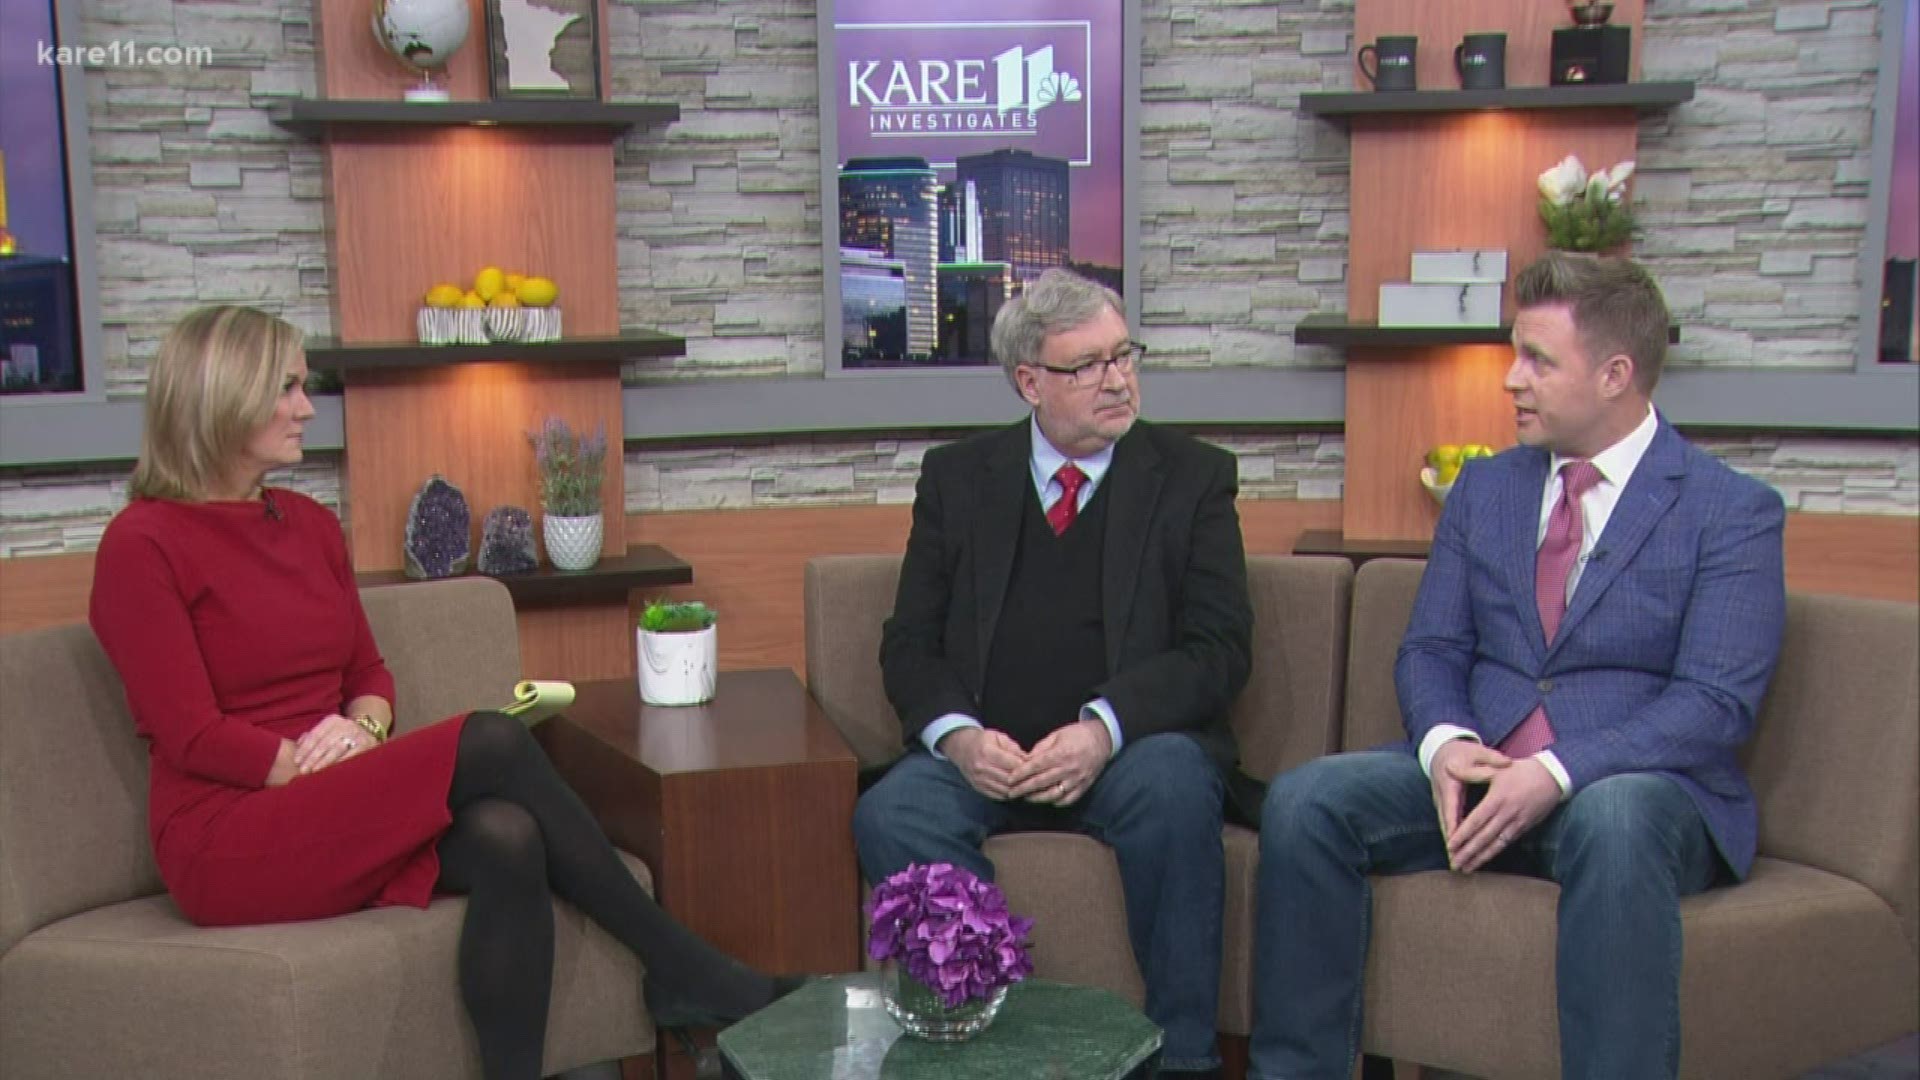 KARE 11's two wins are among only 16 awards given out across the country.